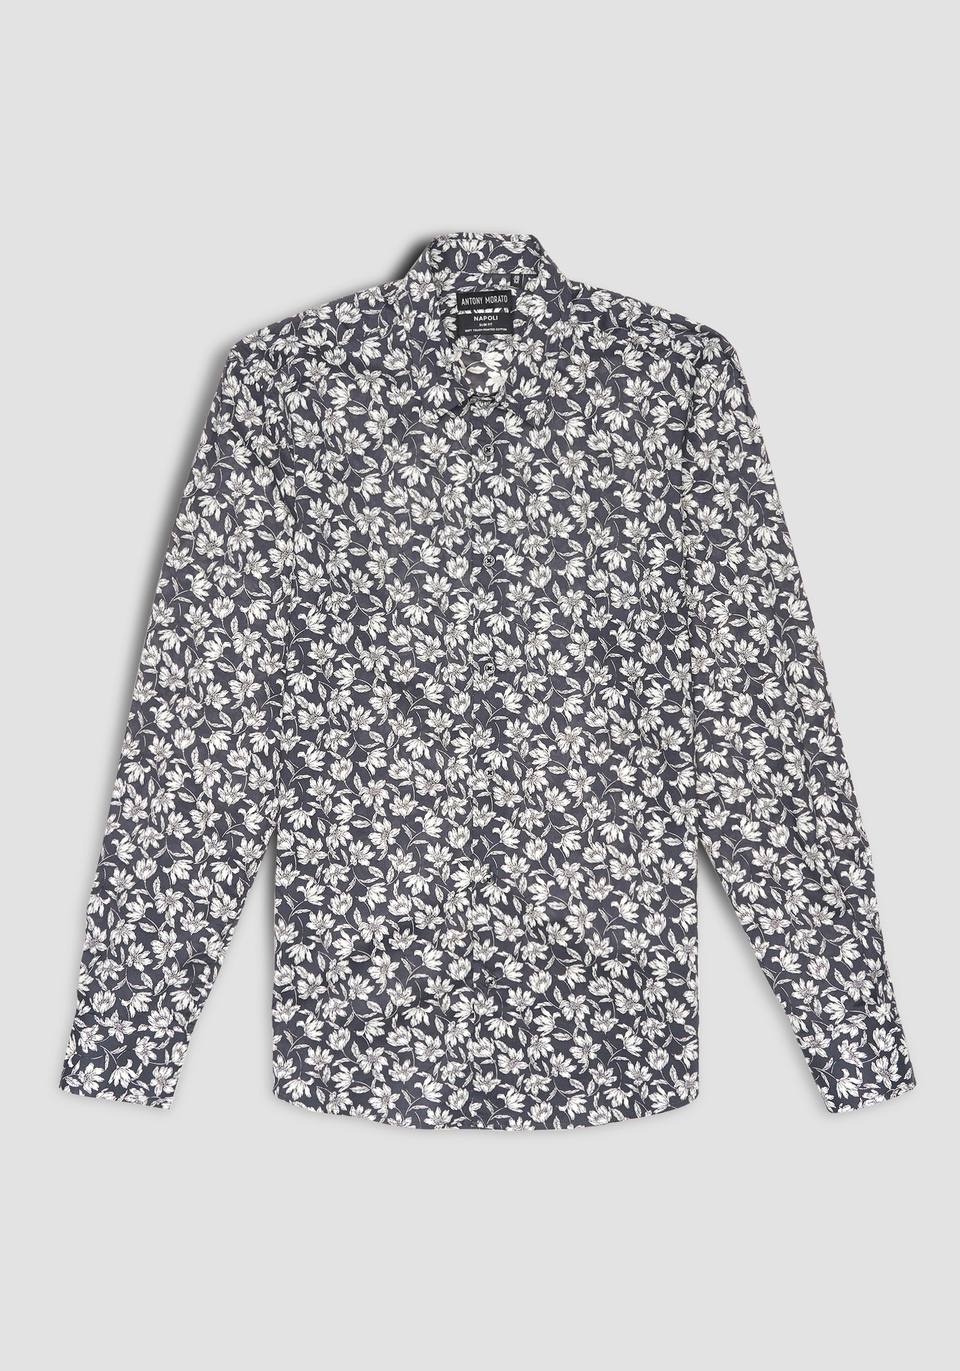 "NAPOLI" SLIM FIT SHIRT IN SOFT-TOUCH COTTON WITH FLORAL PRINT - Antony Morato Online Shop